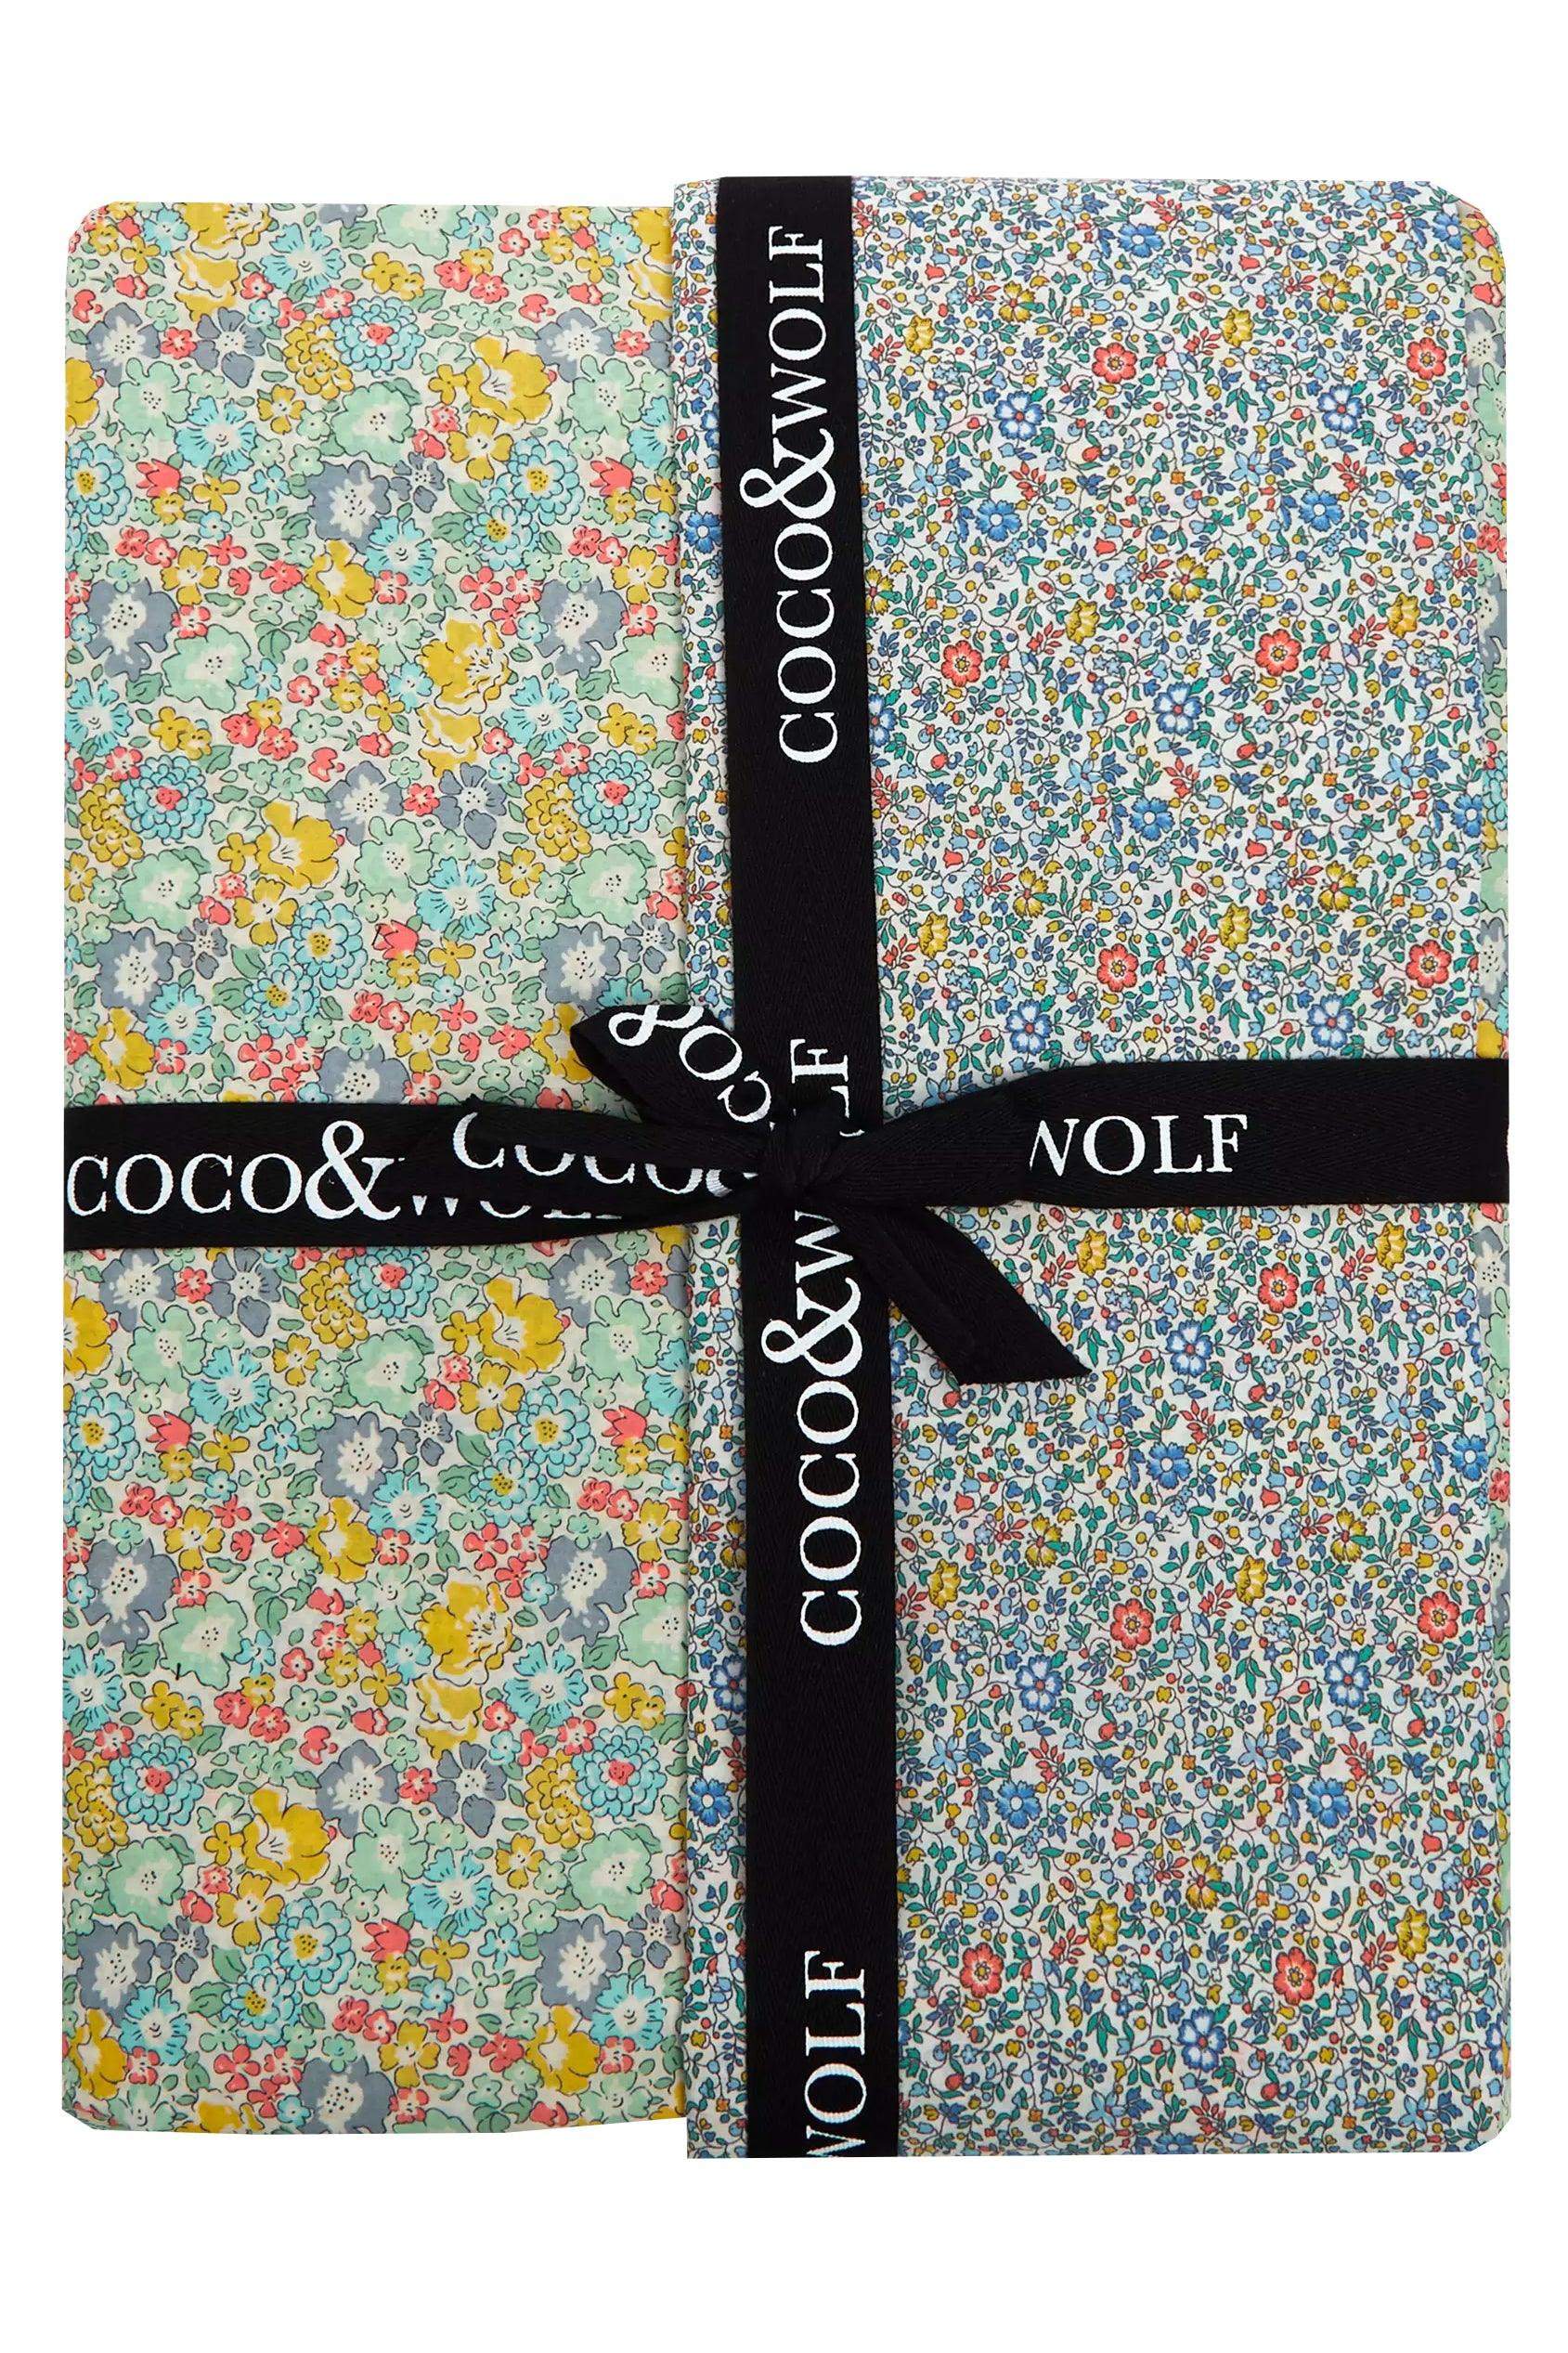 Bedding made with Liberty Fabric MICHELLE PISTACHIO & KATIE & MILLIE - Coco & Wolf